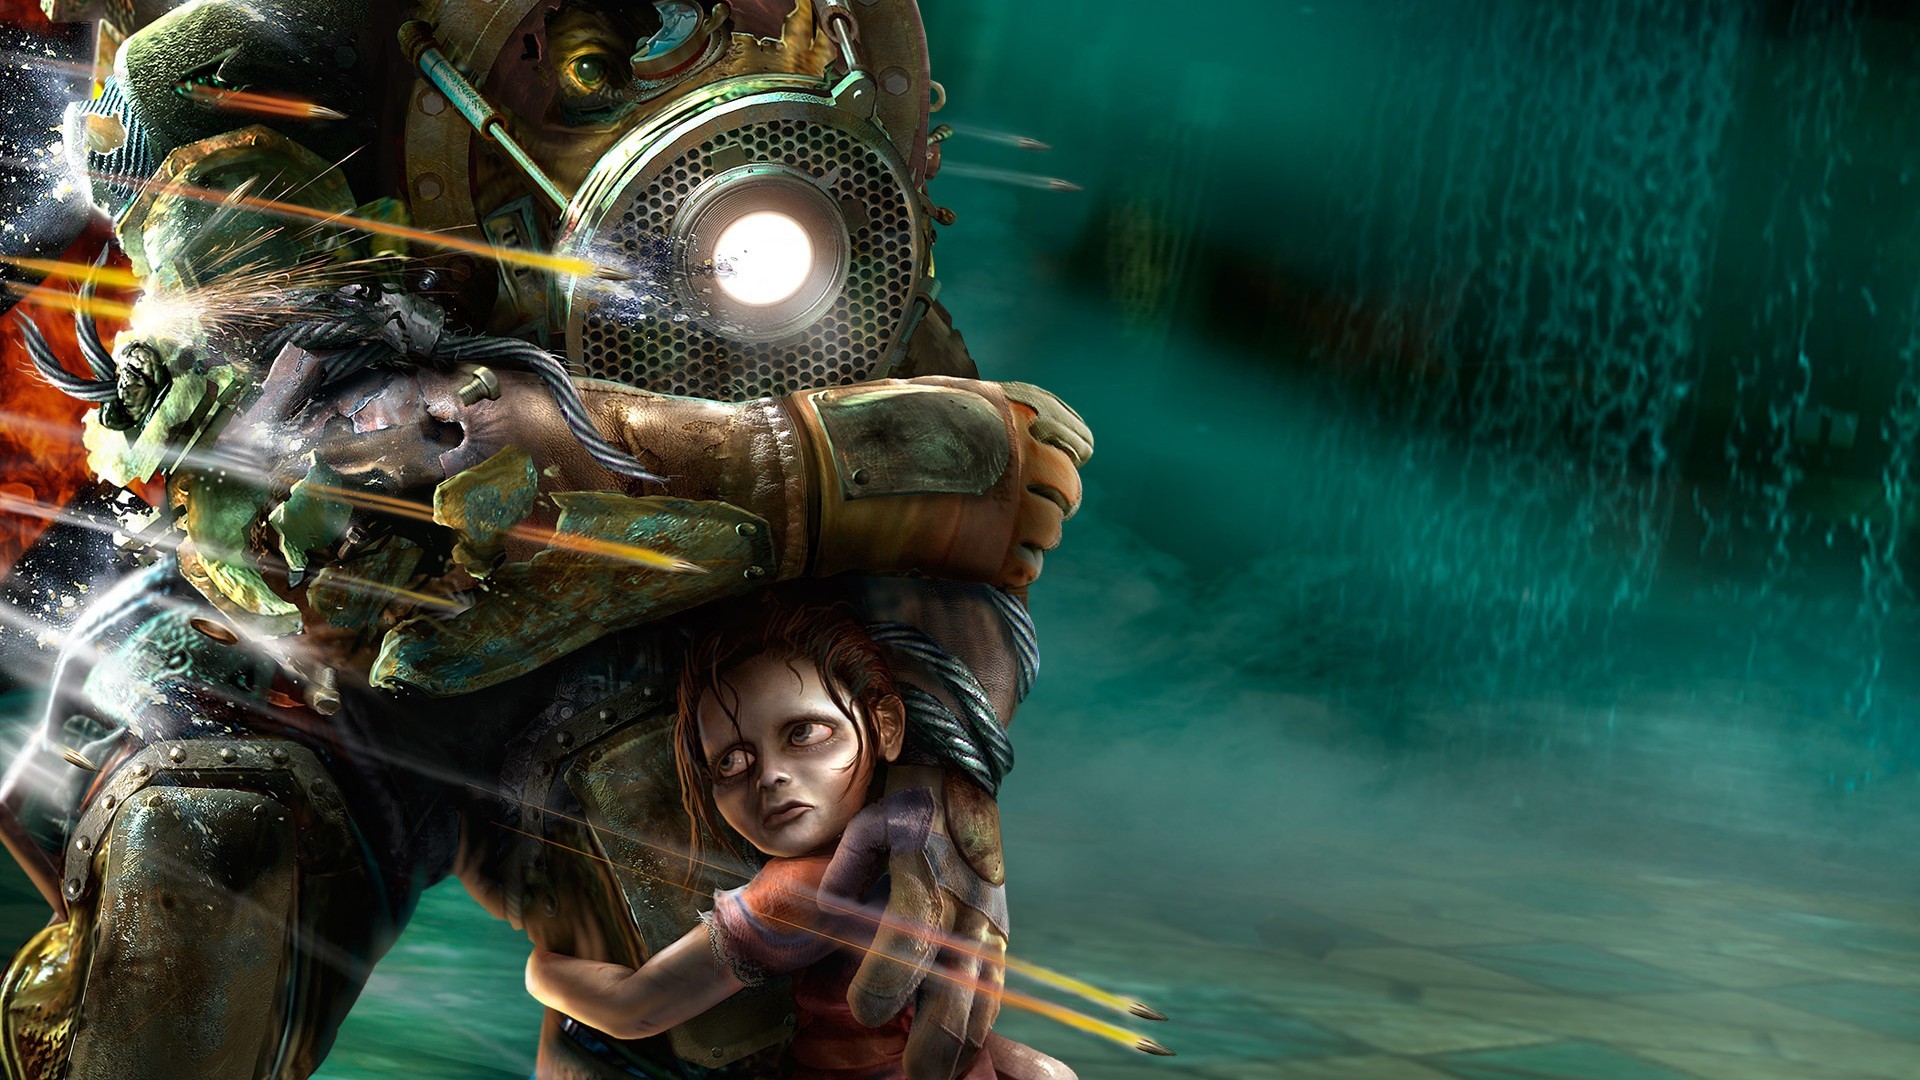 1920x1080 ... Backgrounds - Wallpaper Abyss 23 Awesome Bioshock 2 Desktop Wallpapers  bioshock-2-wallpaper-rain .